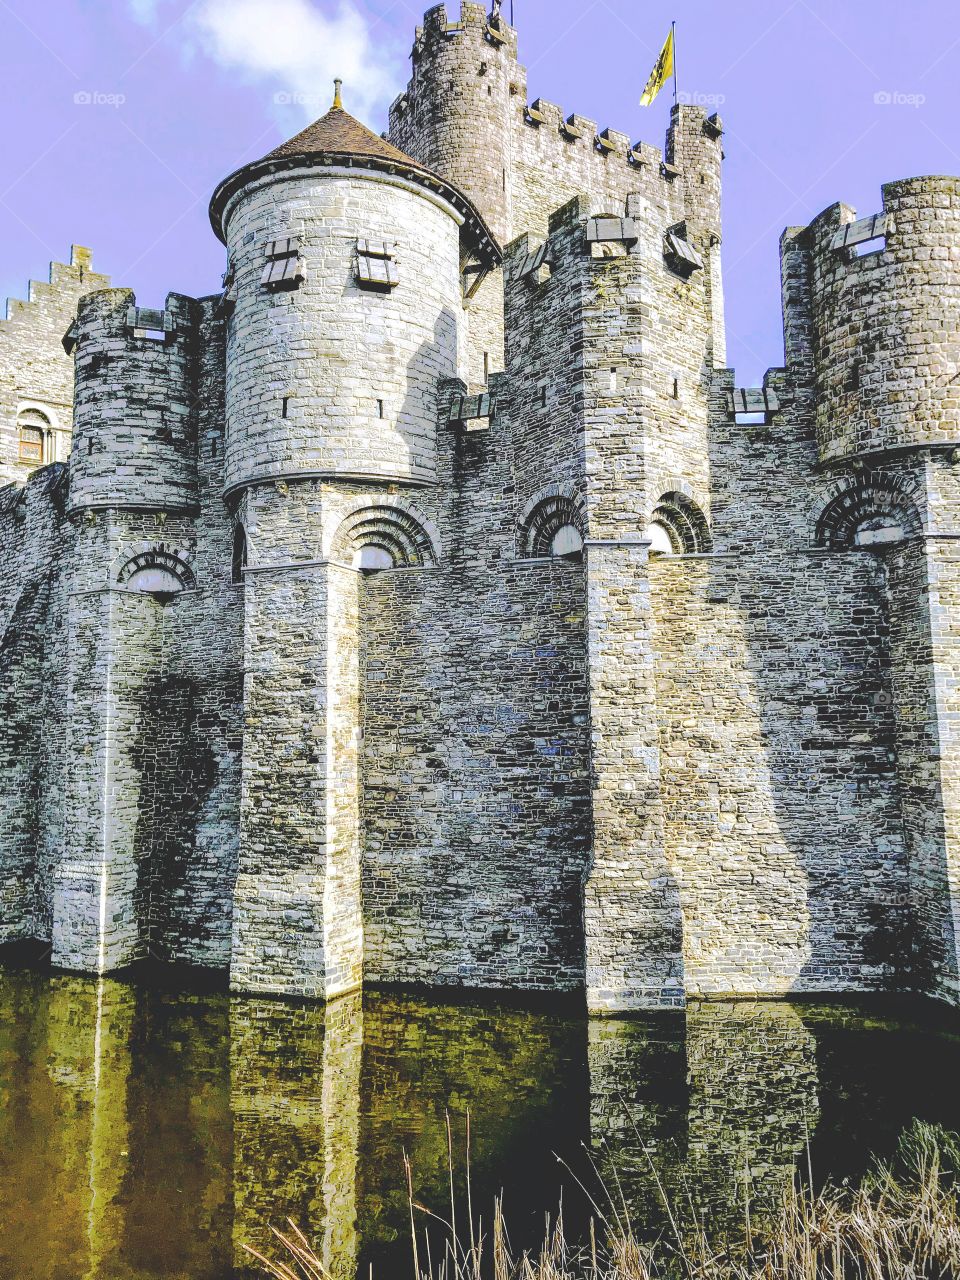 12th century Fortress Gravensteen / motte-and-bailey Castle of the Counts - Ghent, Belgium